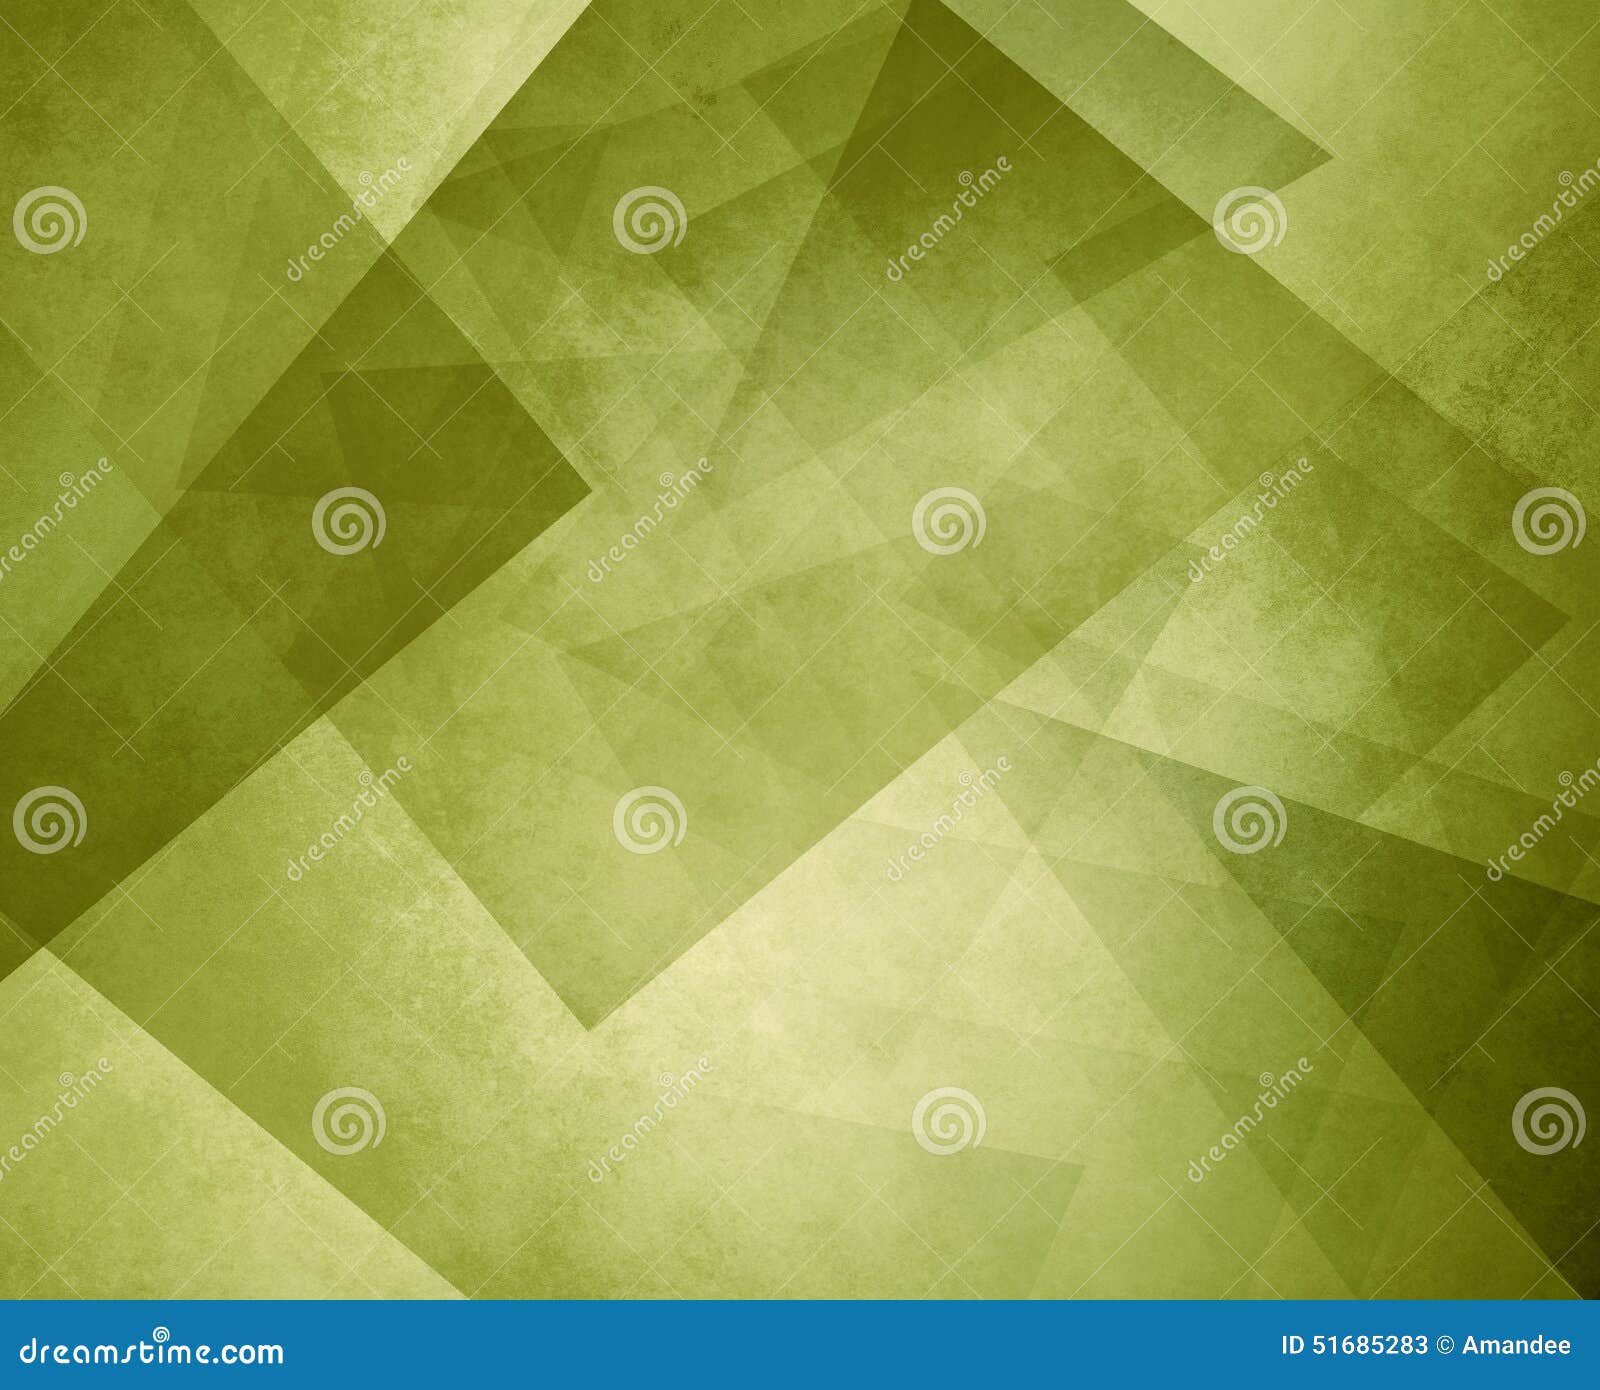 abstract olive green geometric background with layers of triangles and rectangles with distressed texture 